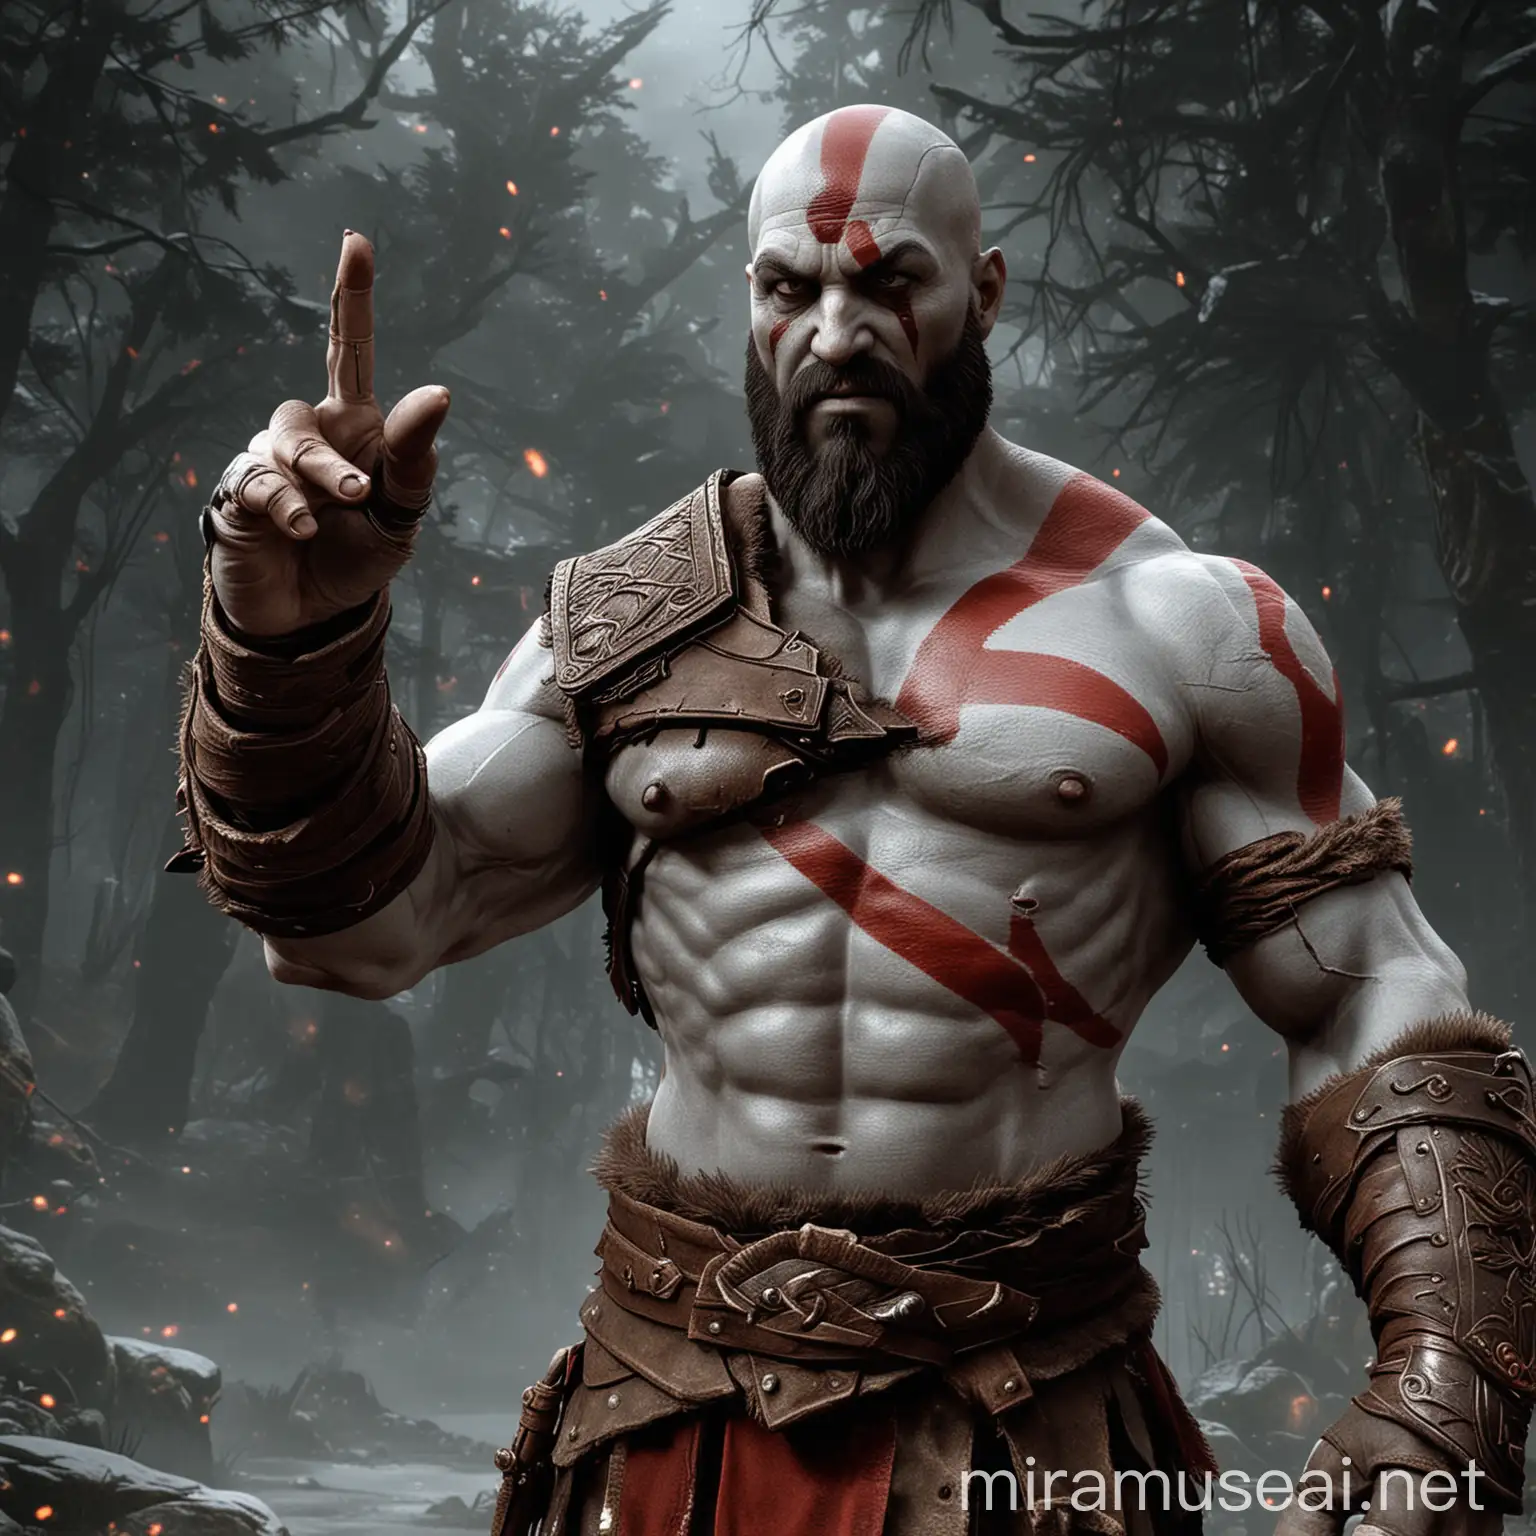 Kratos from God of War Pointing with One Finger